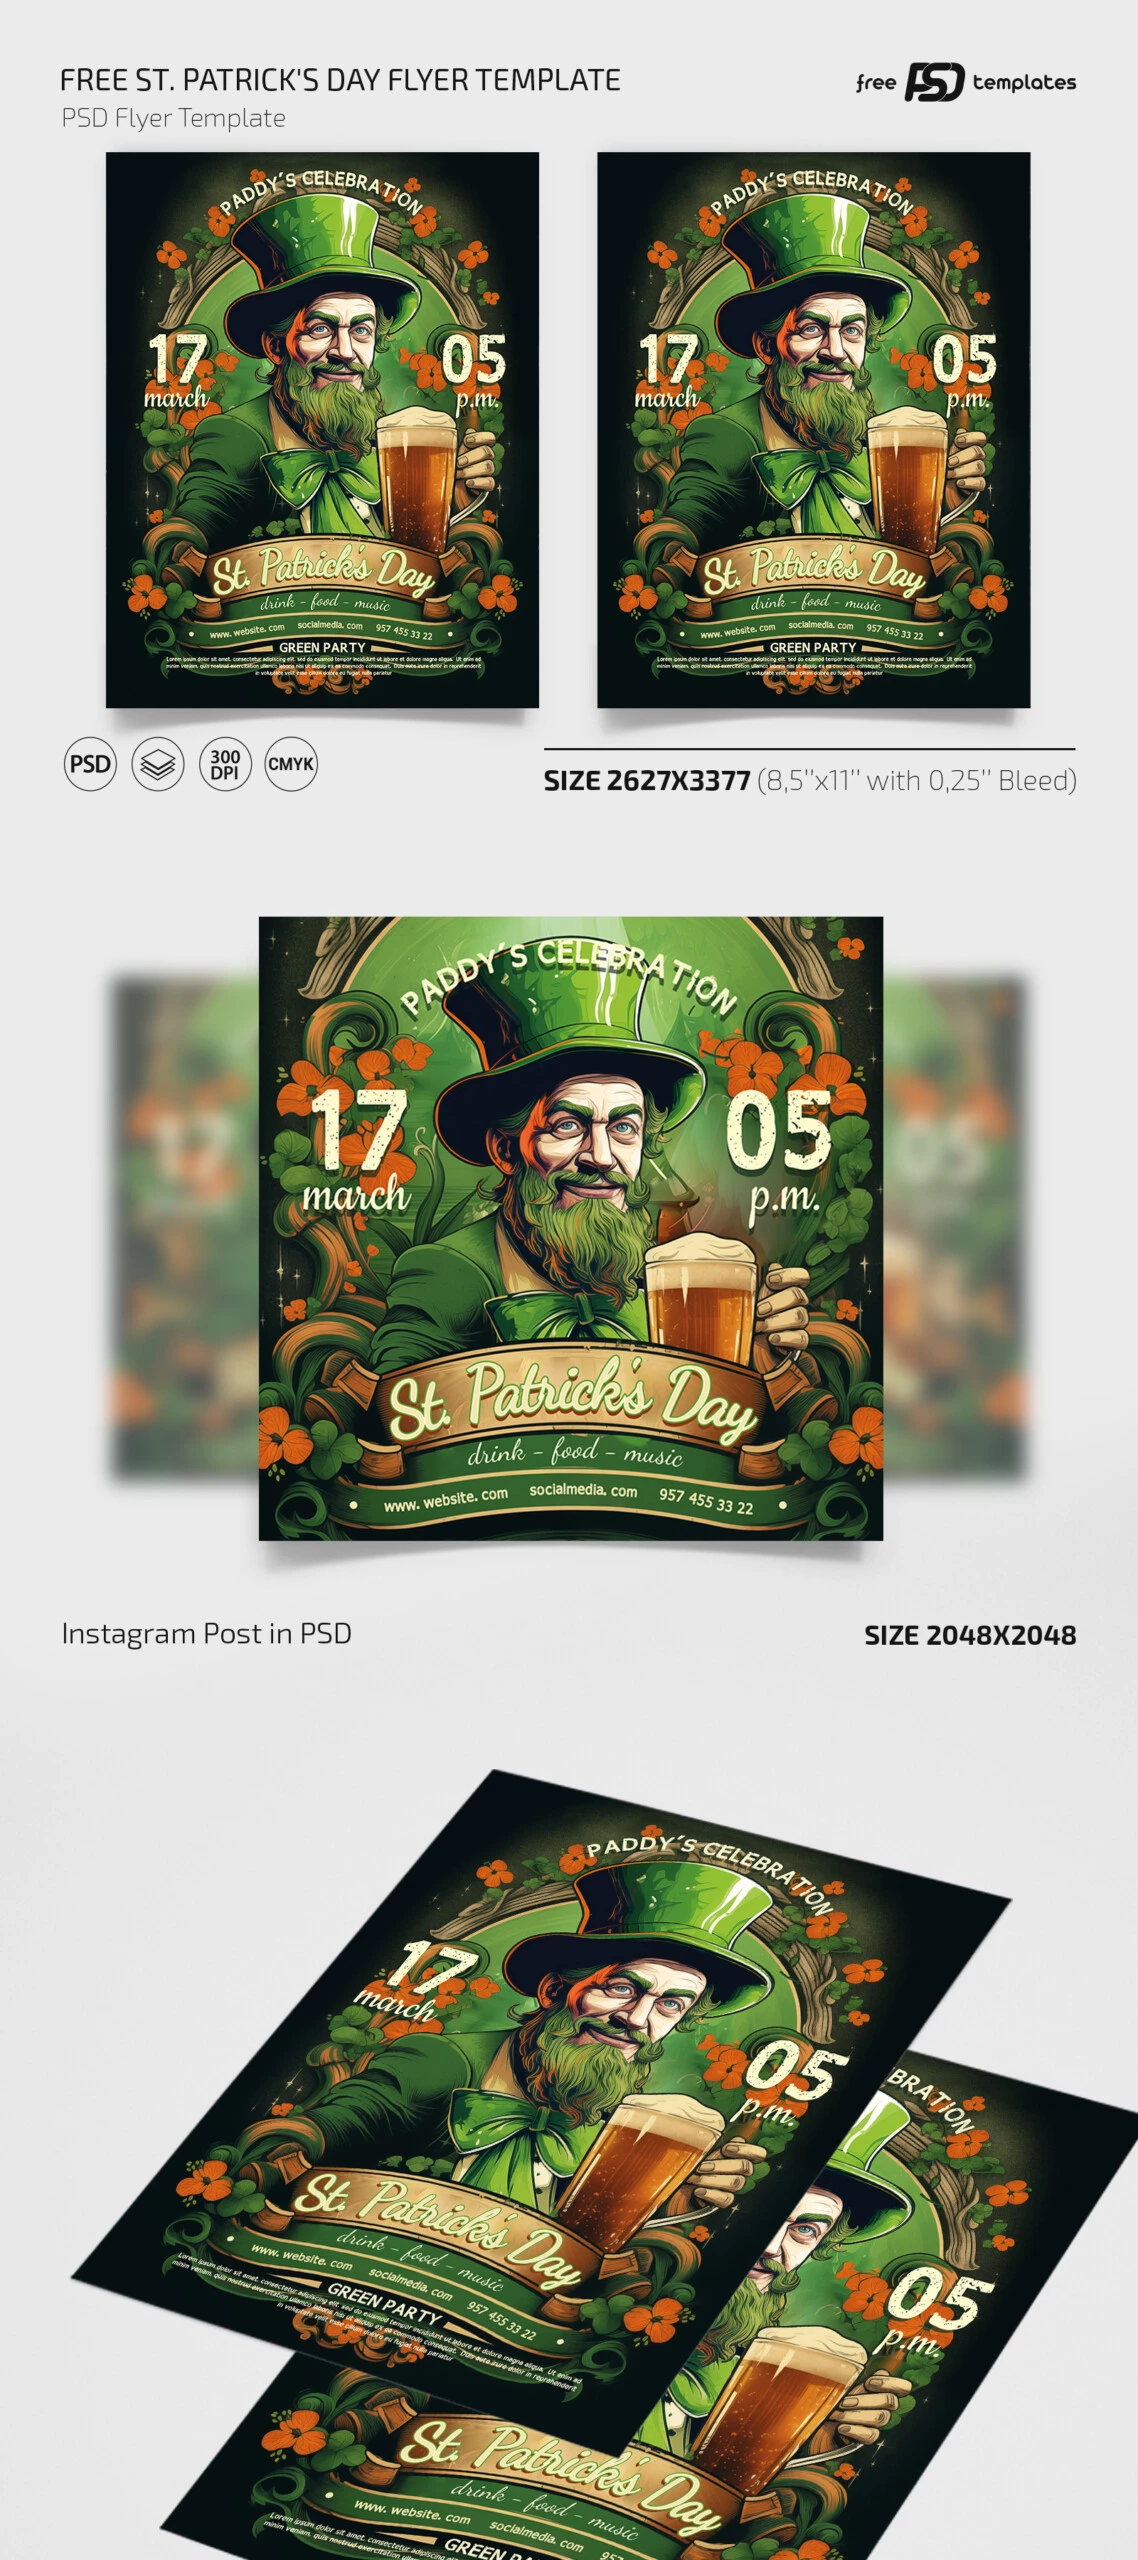 Free St Patrick’s Day Flyer Template PSD